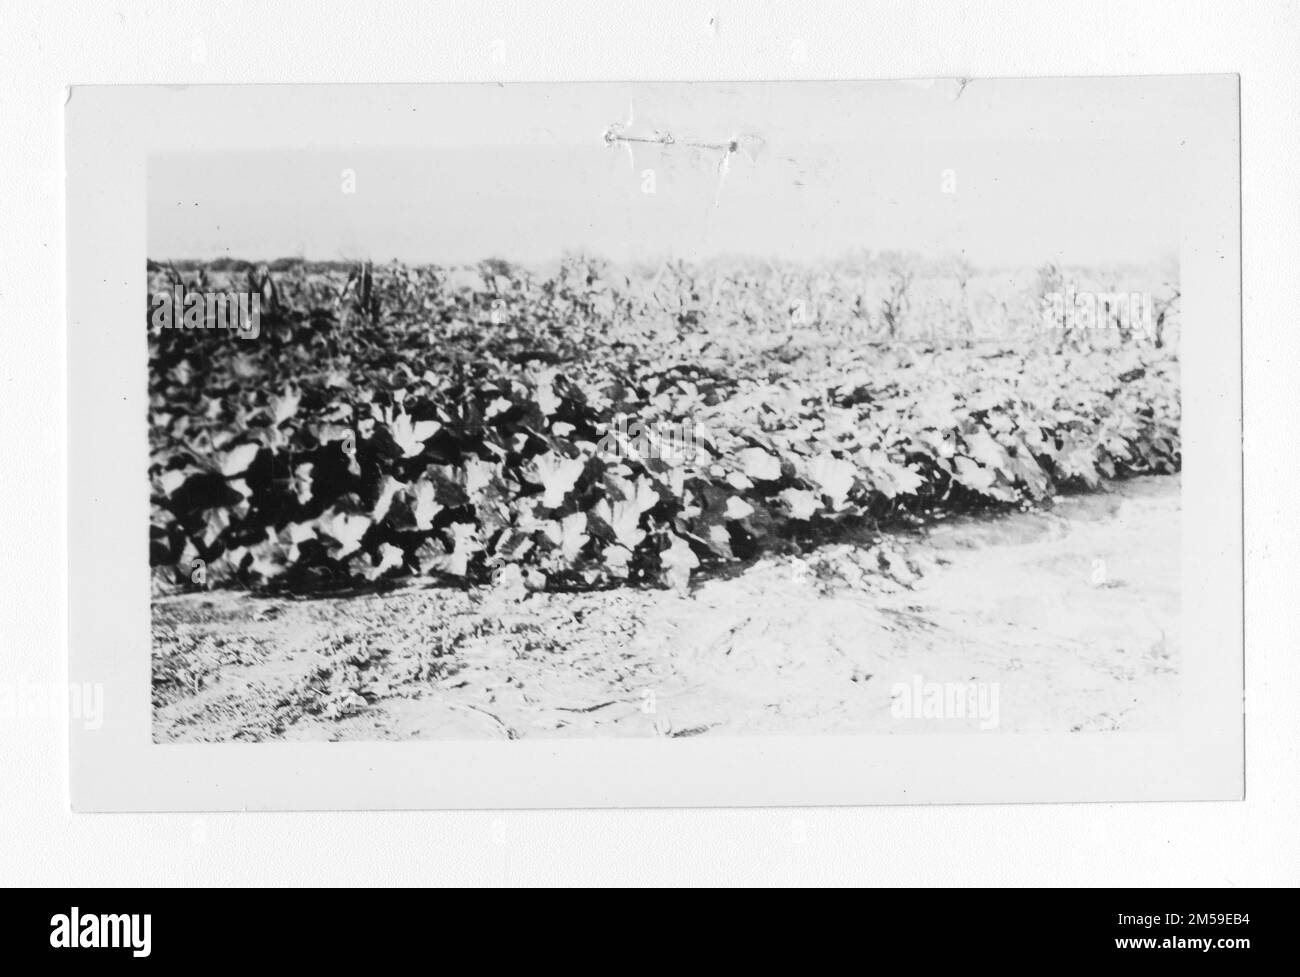 Original caption: 'Growing crops of pumpkins, corn, sweet potatoes and okra on an Indian irrigated farm in Coachella Valley'. 1936 - 1942. Pacific Region (Riverside, CA). Photographic Print. Department of the Interior. Office of Indian Affairs. Mission Agency. 11/15/1920-6/17/1946. Photographs Stock Photo